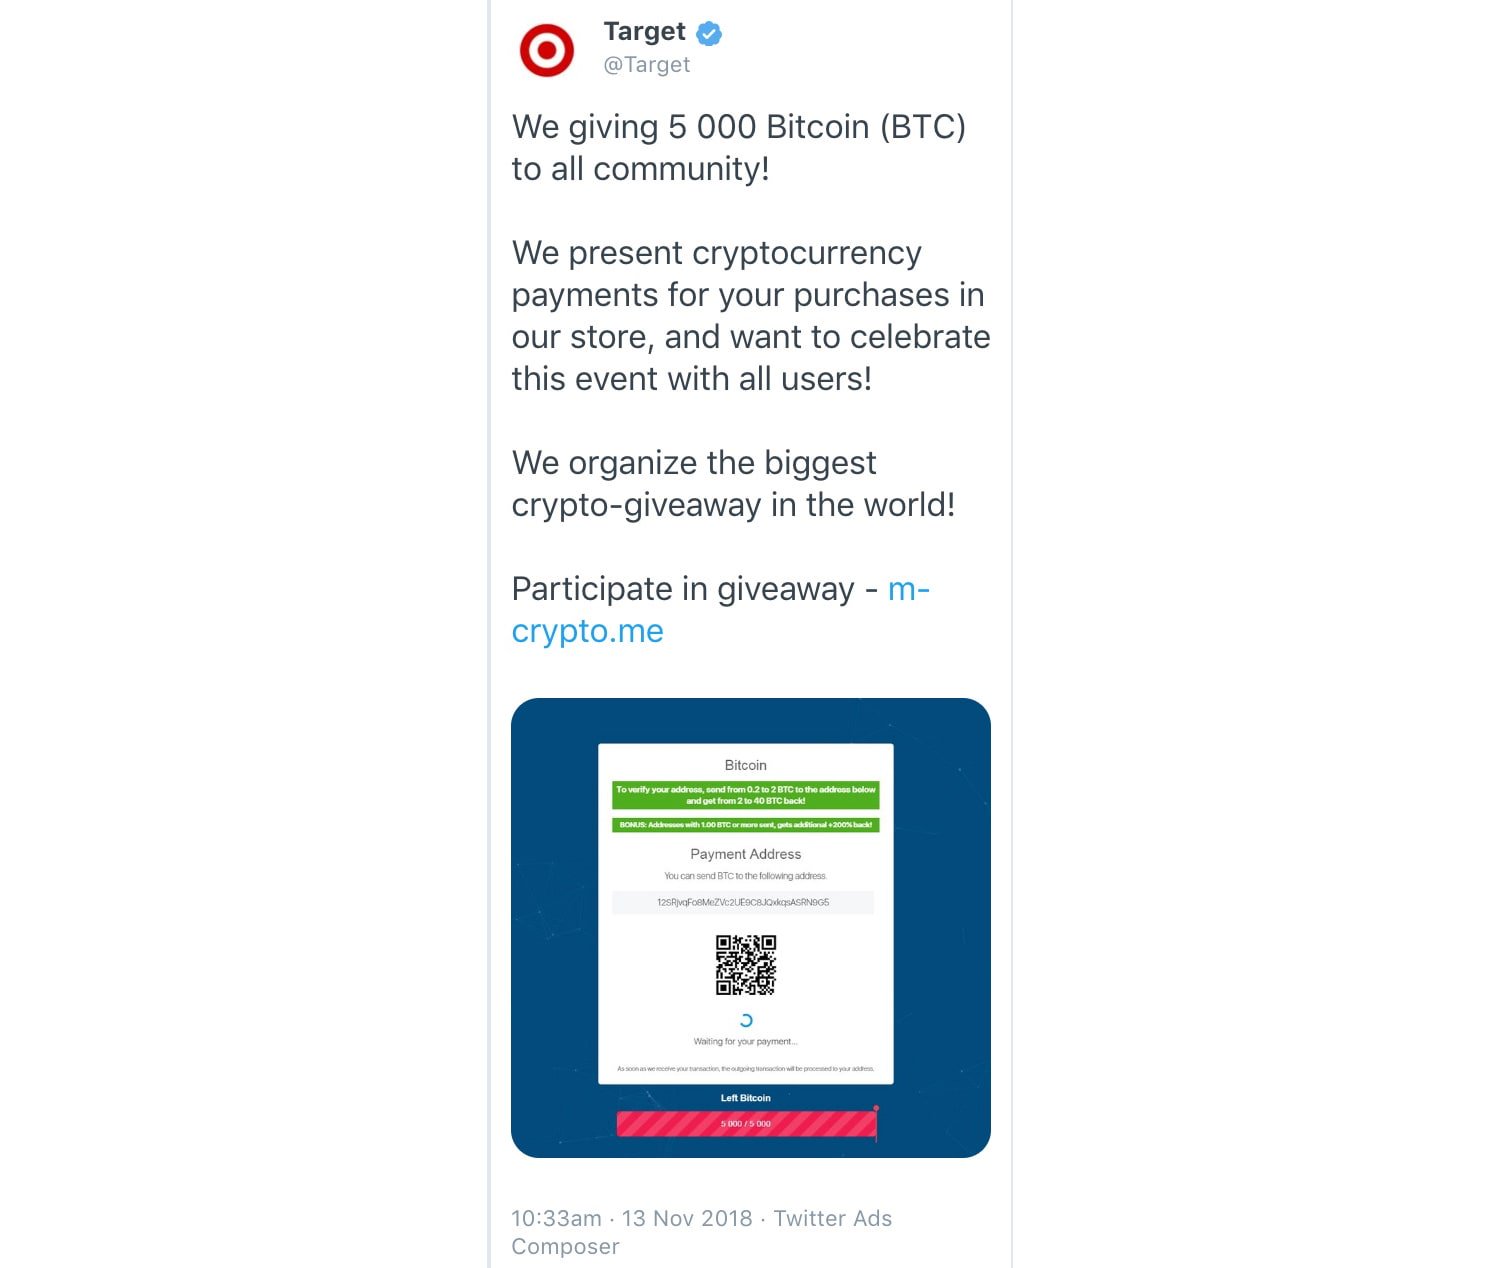 An ad from official Target's account promoting cryptocurrency giveaways